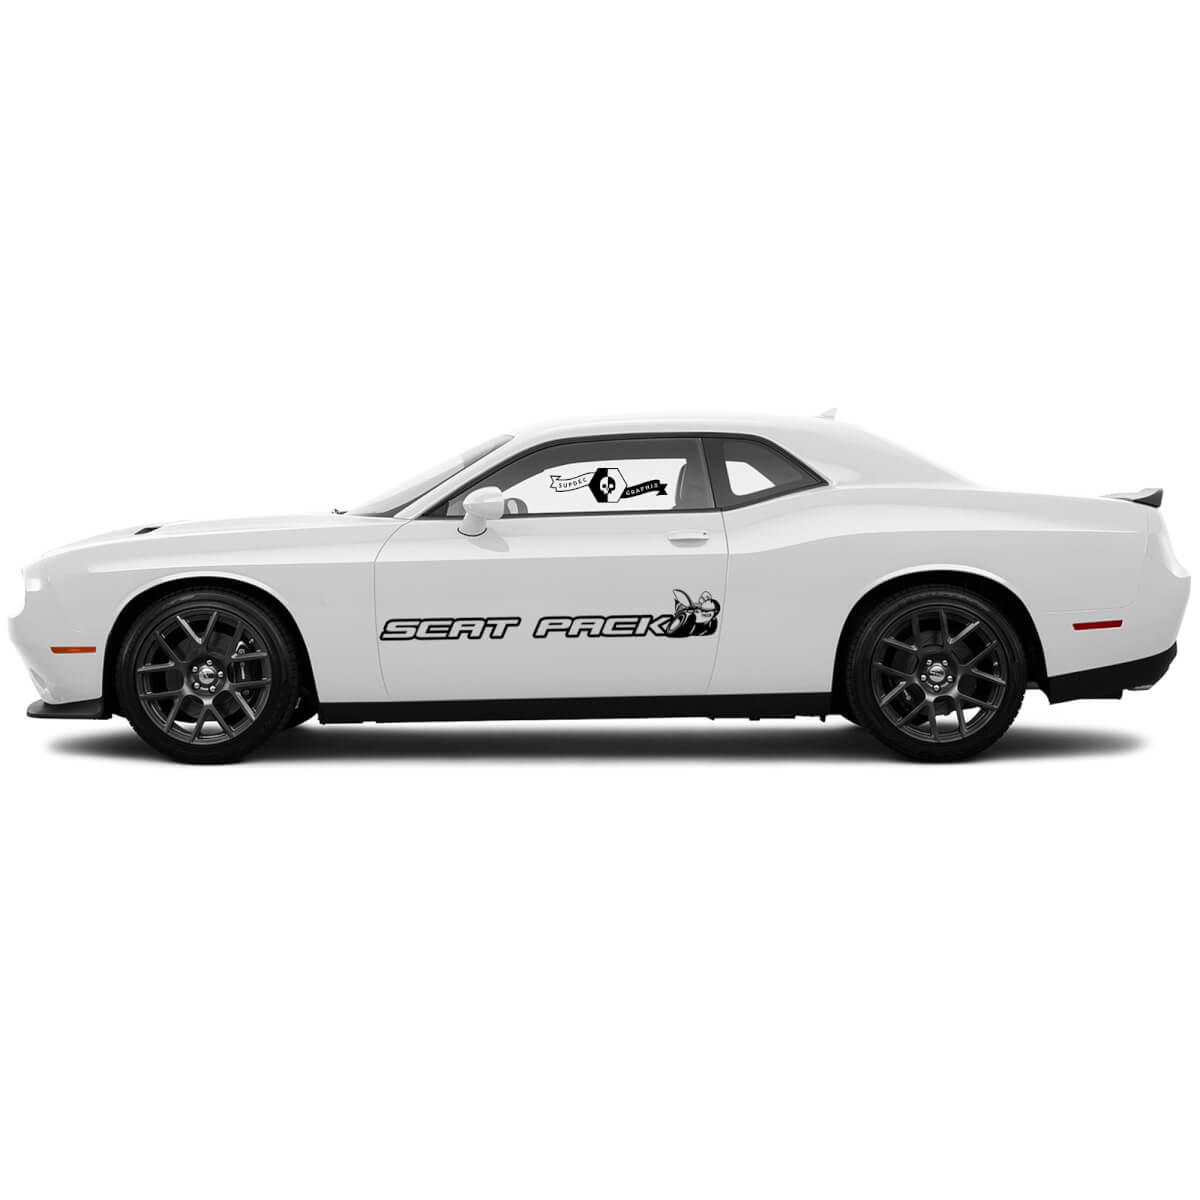 Scat Pack side for Dodge Challenger or Charger Side Vinyl Decals Stickers